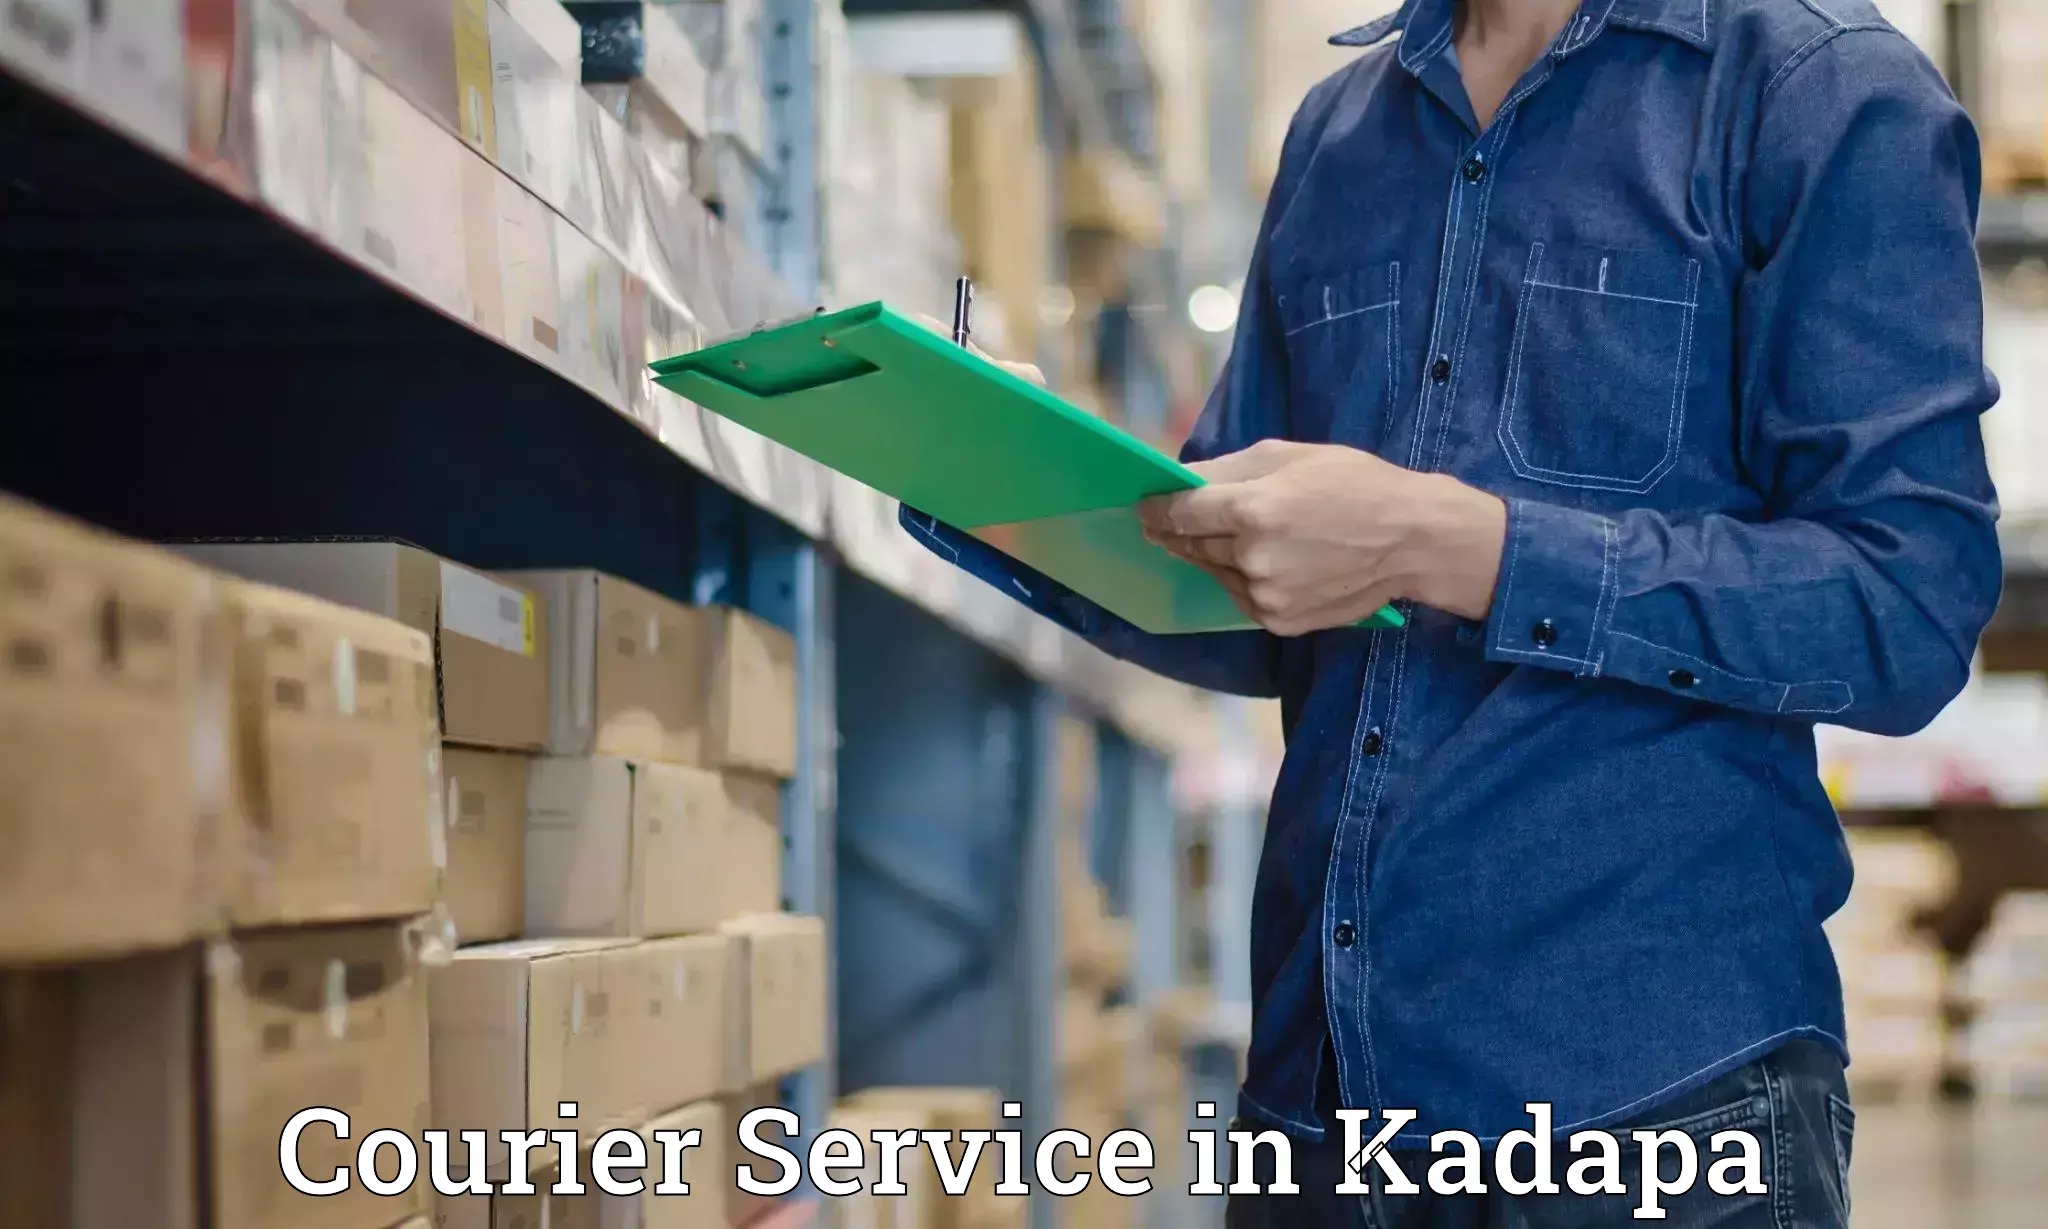 Efficient parcel tracking in Kadapa